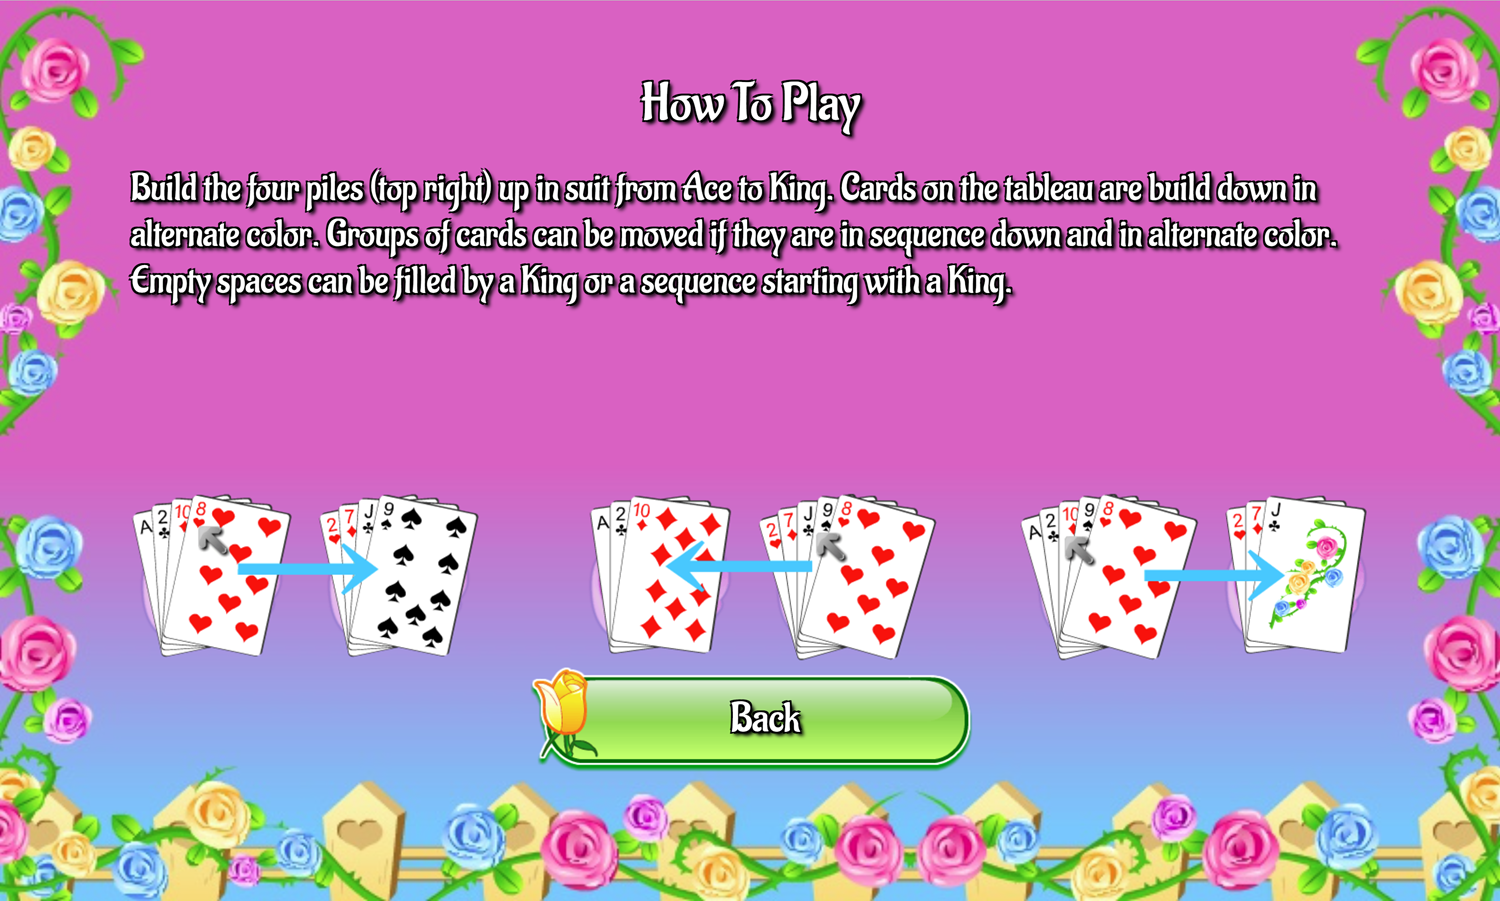 Flower Solitaire Game How to Play Screen Screenshot.